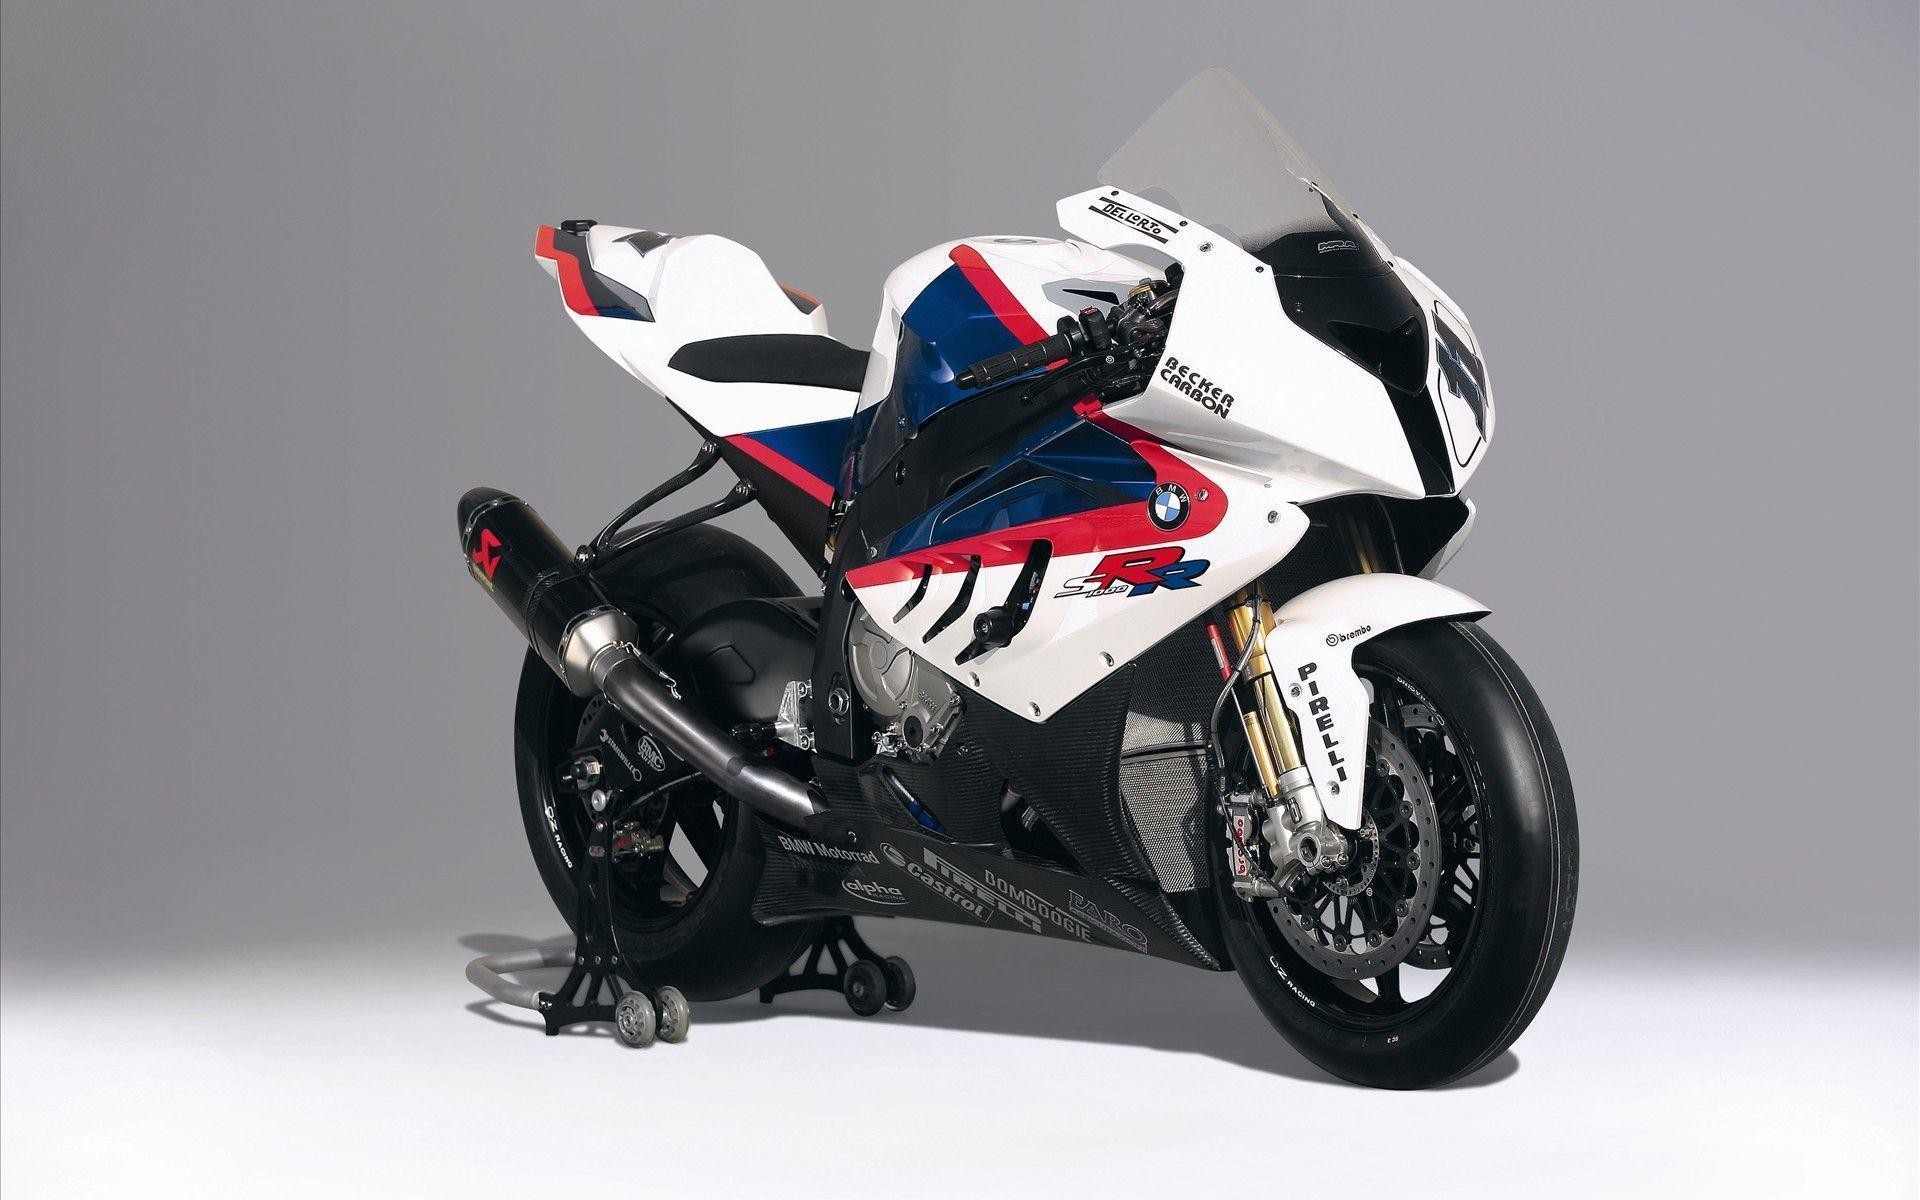 New Car Photo: Soper Bikes Collection Wallpapers